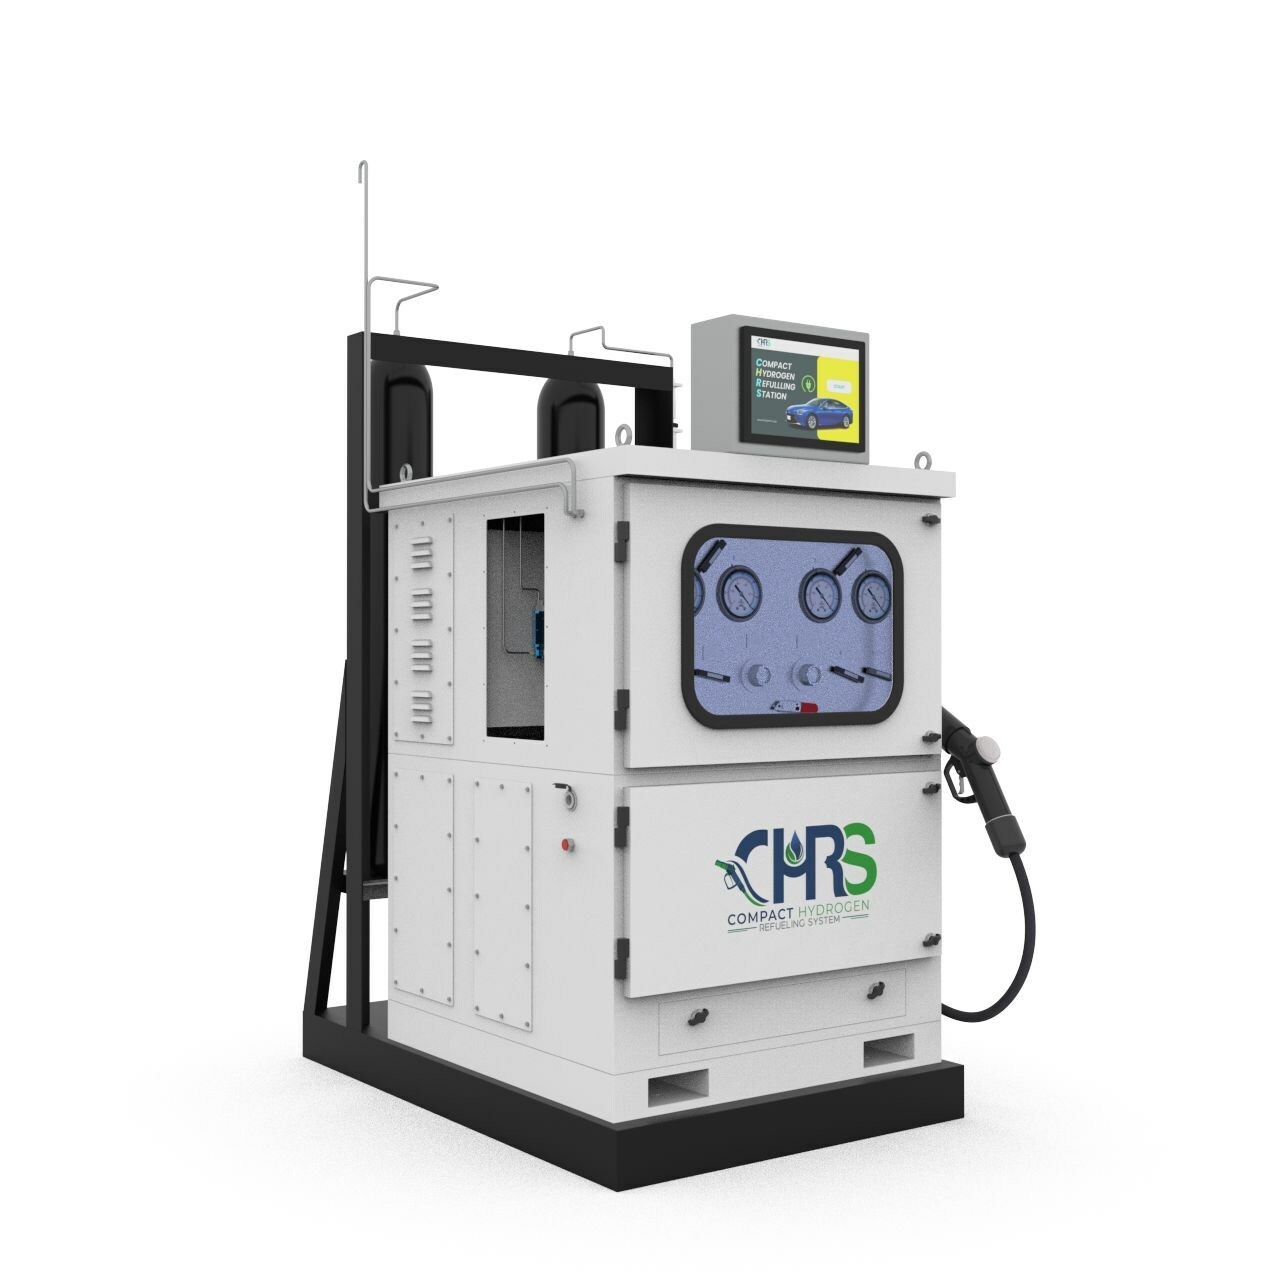 CHRS - compact hydrogen refueling station. CHRS produces and dispenses clean hydrogen made from water for fuel cell electric vehicles (FCEVs), hydrogen internal combustion engine vehicles (HICEVs), and more. Effortless, zero-emission driving ahead.